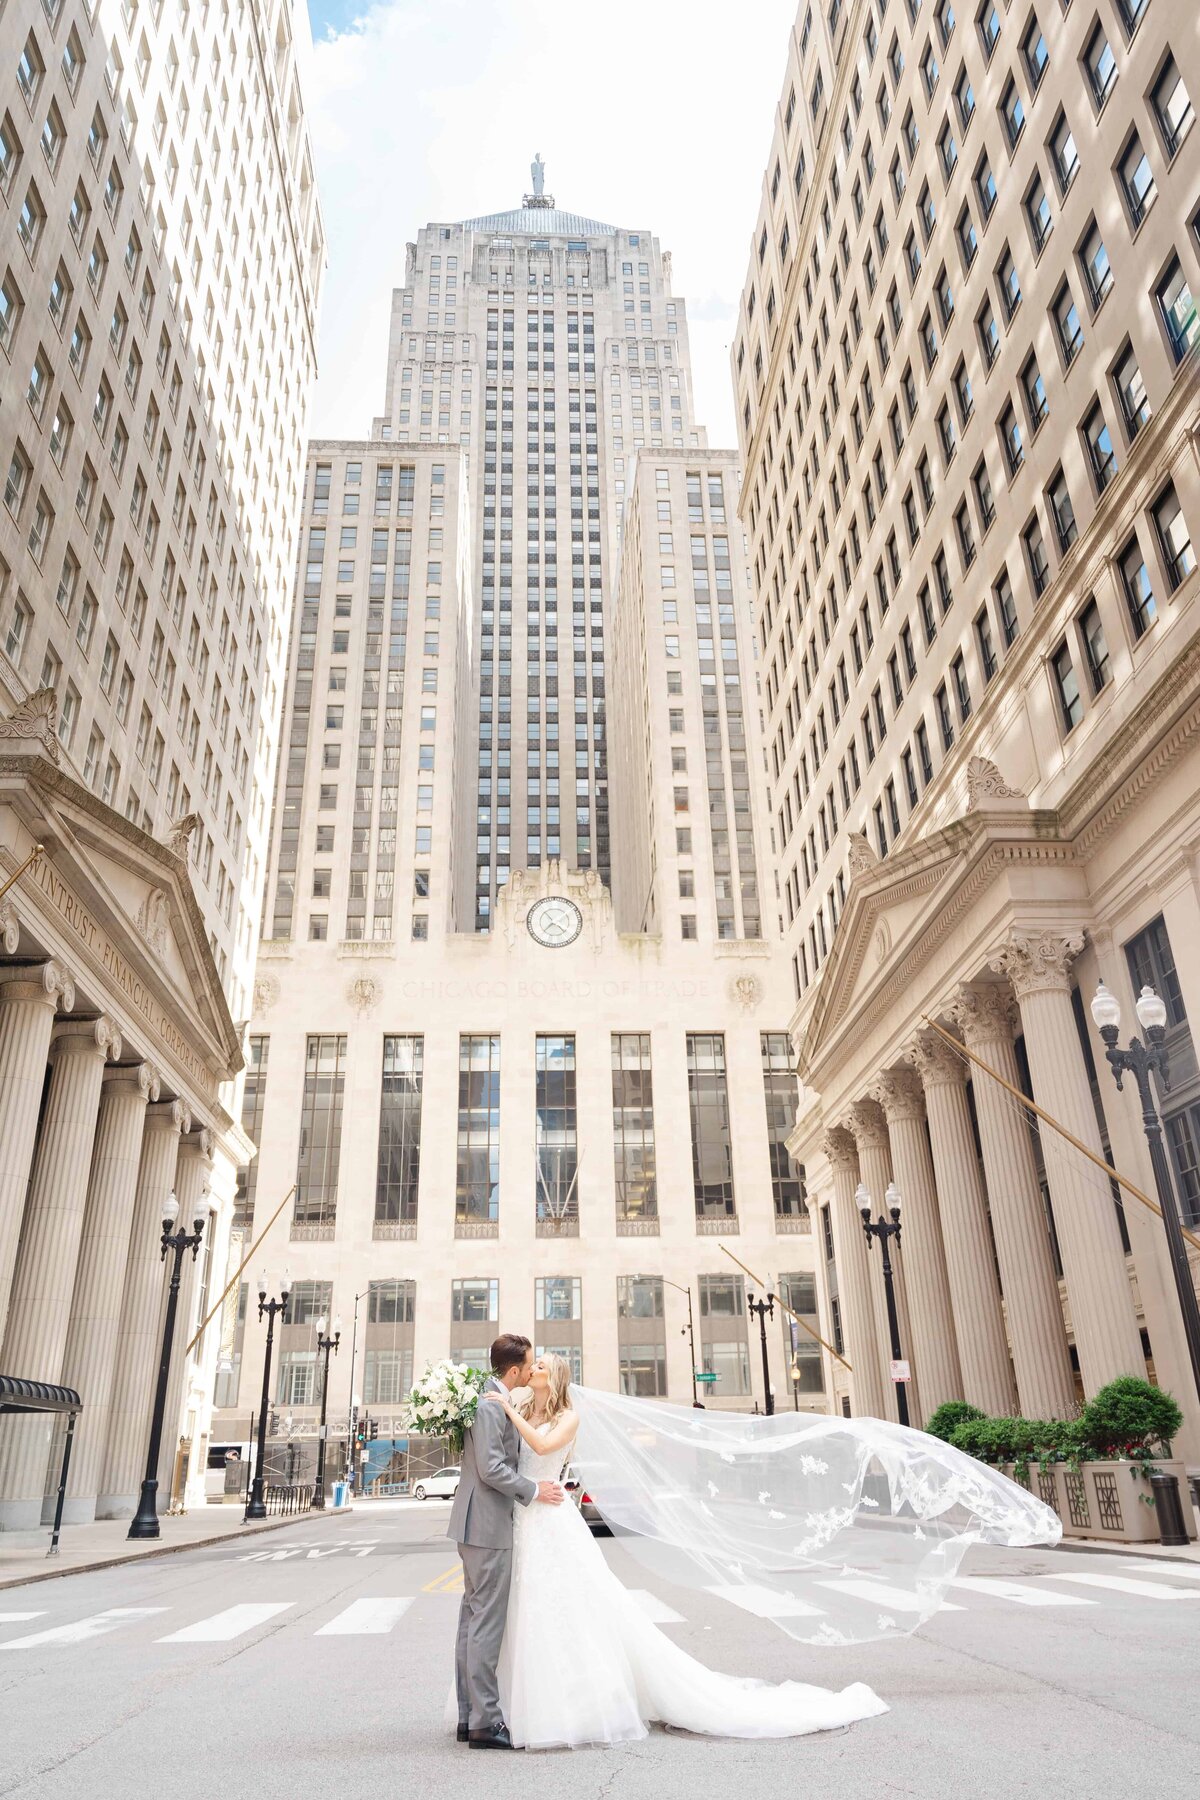 Board of Trade in Chicago Wedding portrait of bride and groom sharing a kiss.